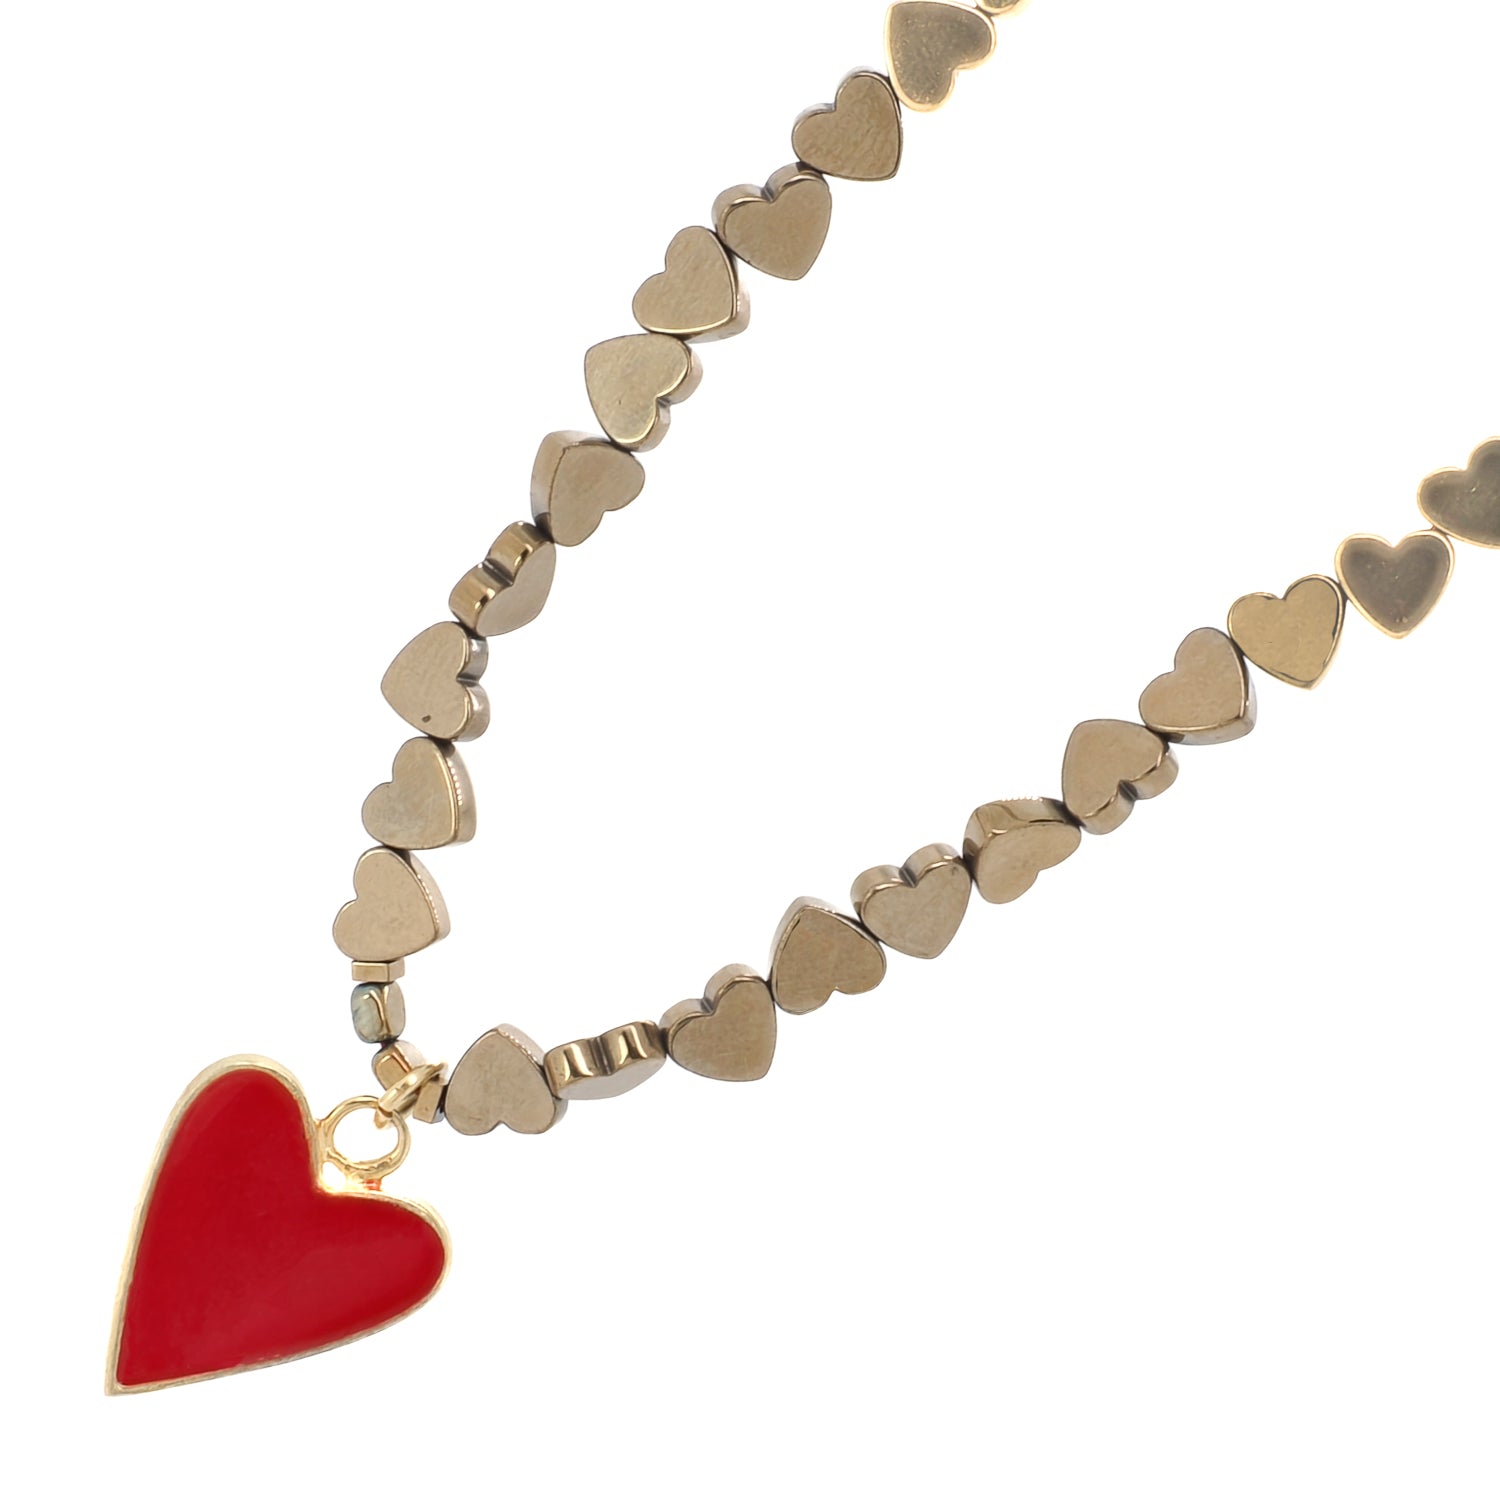 The Big Love Necklace - a symbol of love and positivity.